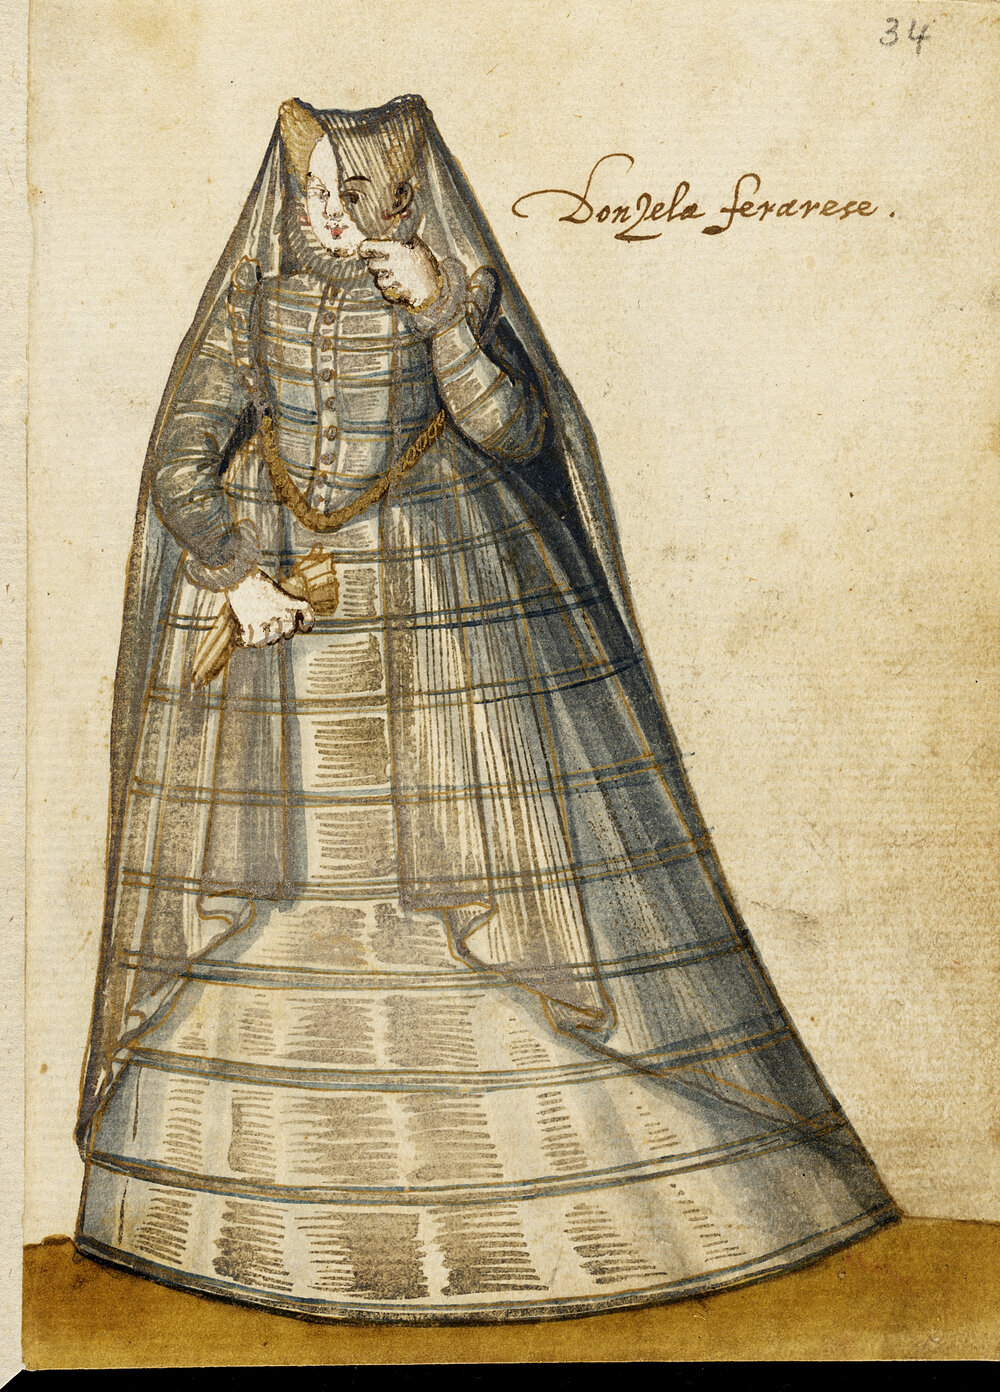  Fig. 5  ‘Donzella Ferrarese’. From an album amicorum of a German soldier, 1595. Los Angeles, Los Angeles Museum of Art, MS. 91, fol. 34 